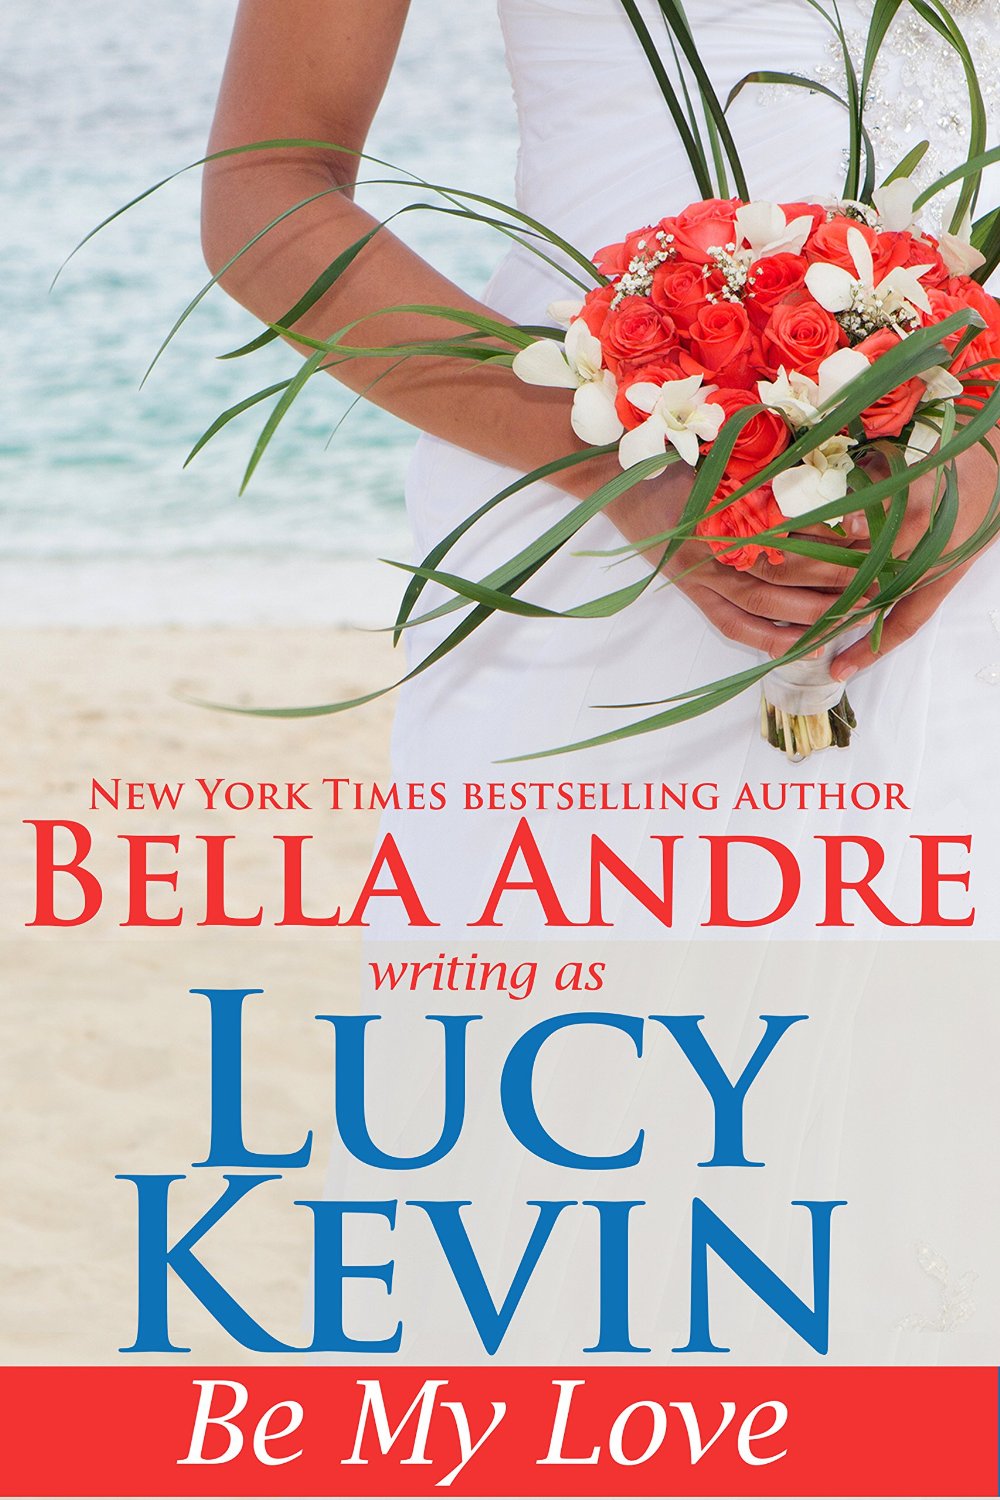 FREE: Be My Love by Lucy Kevin